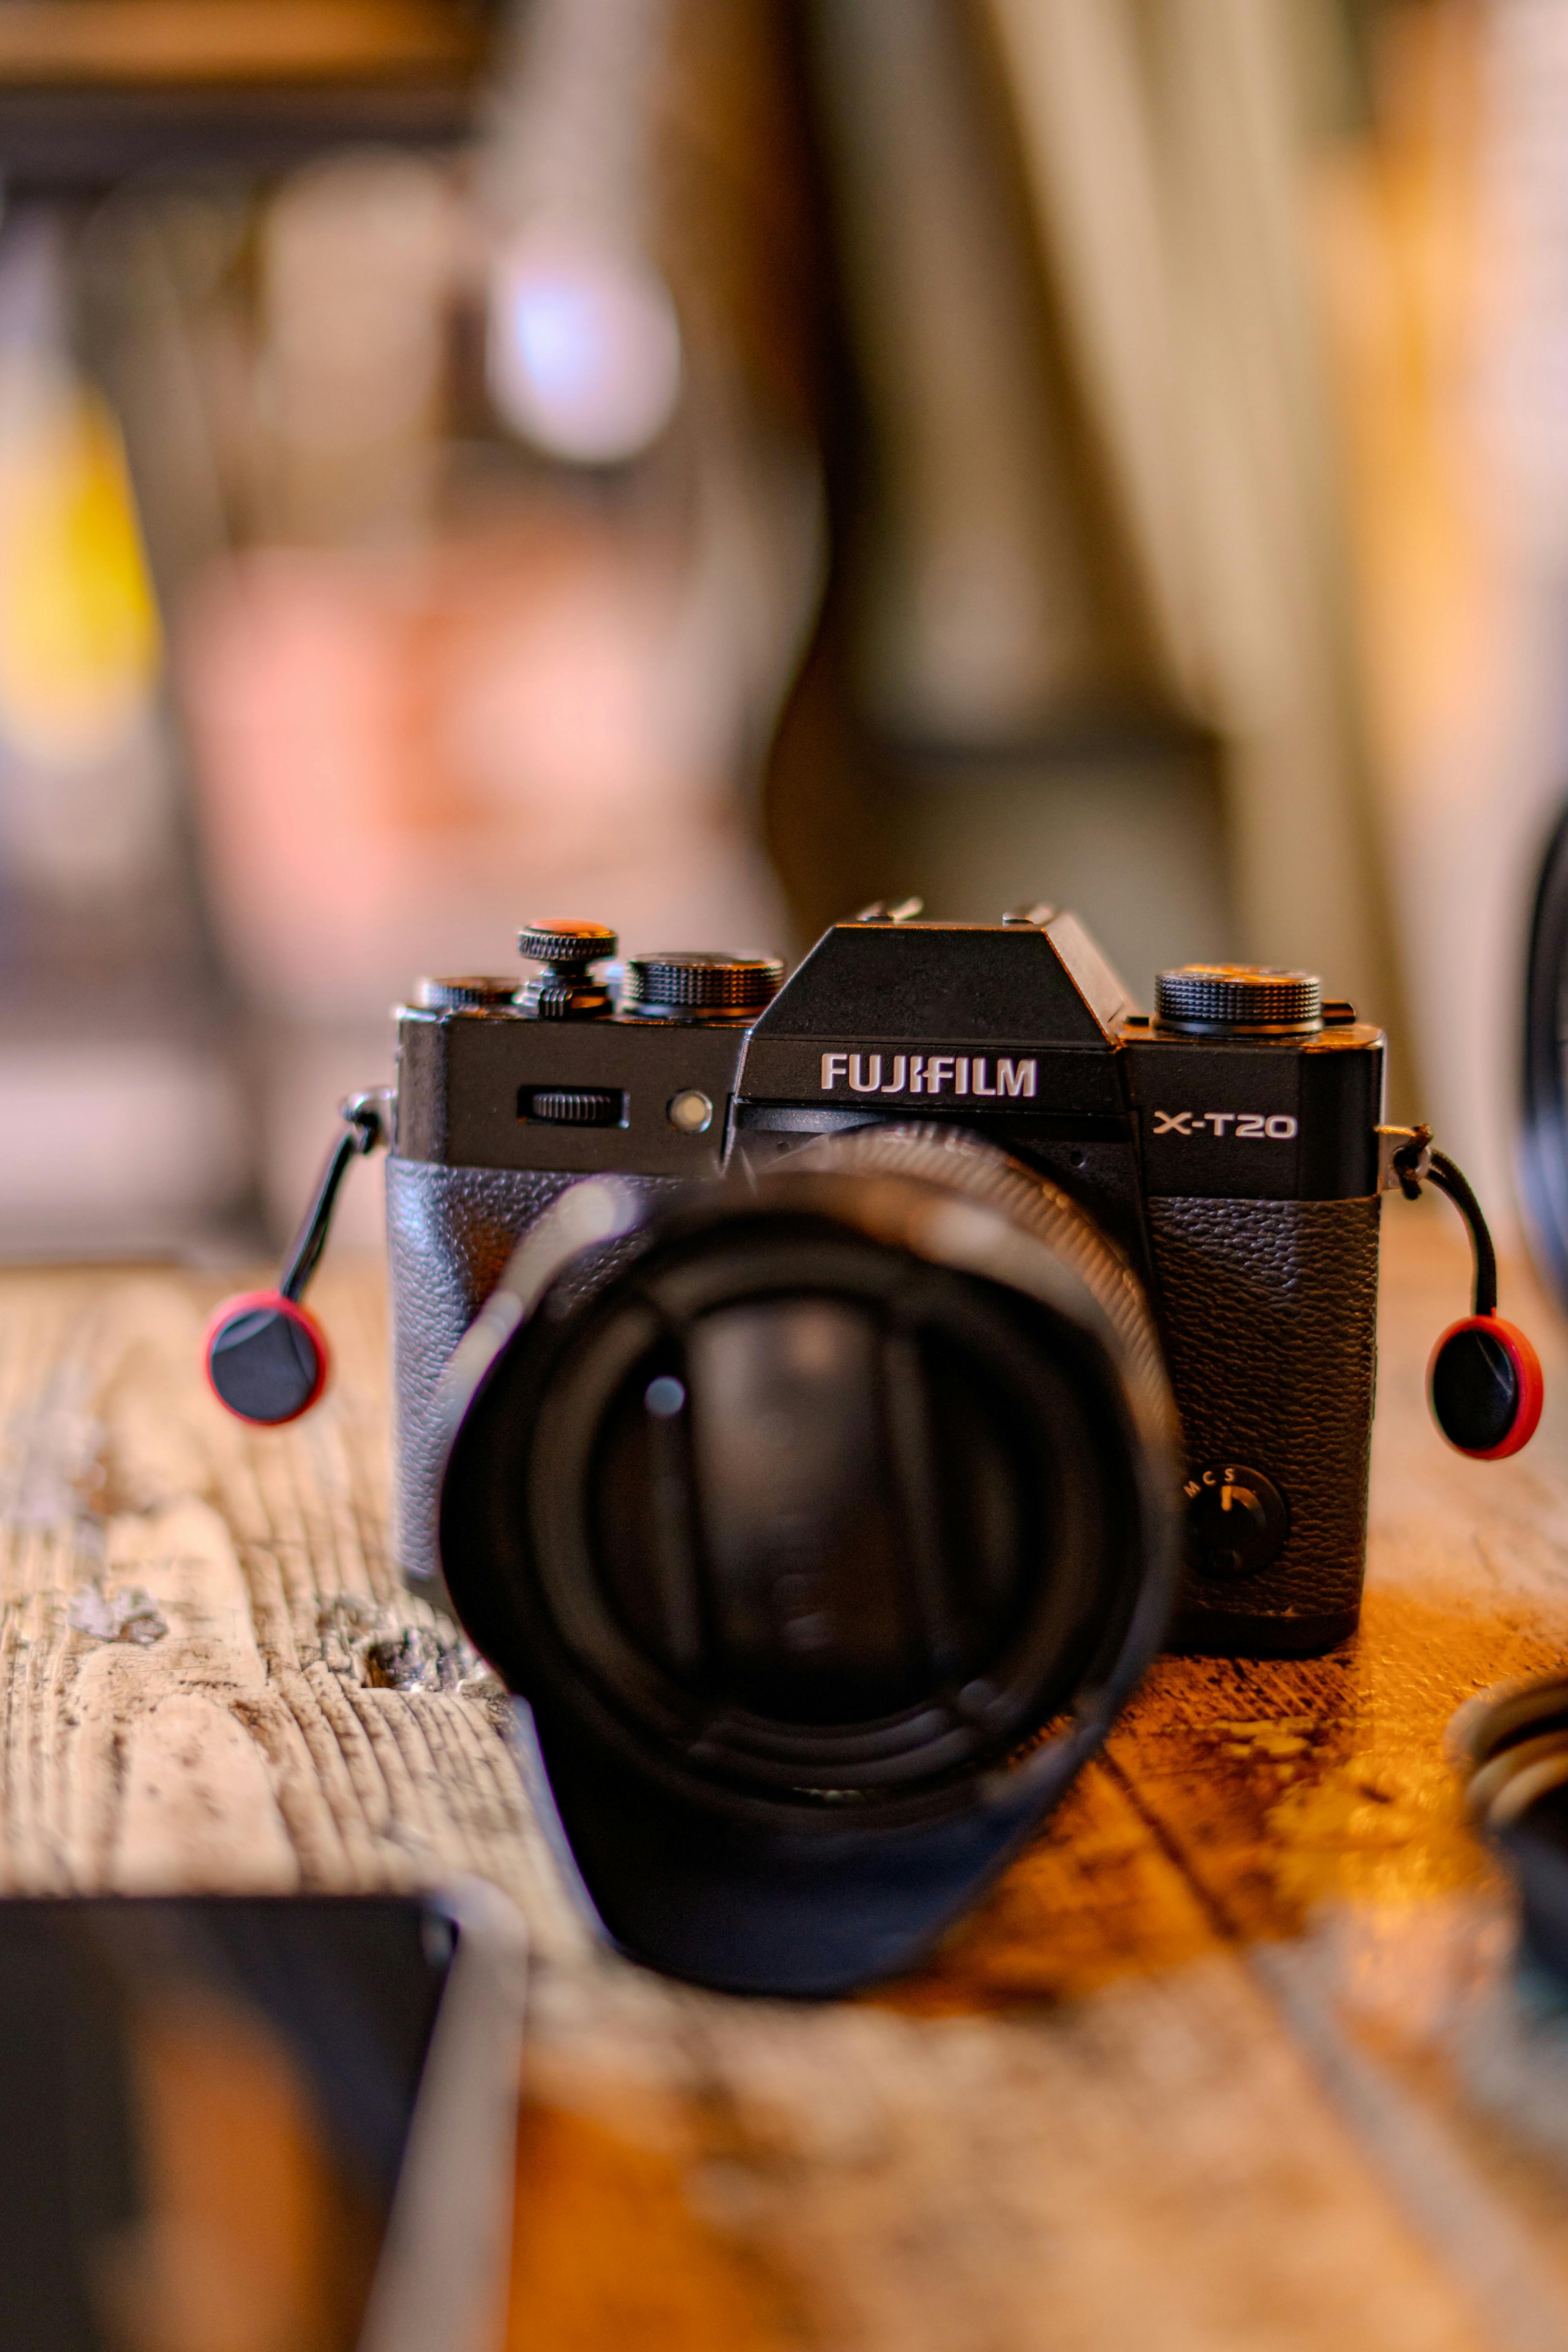 A camera set up on a table | Source: Pexels